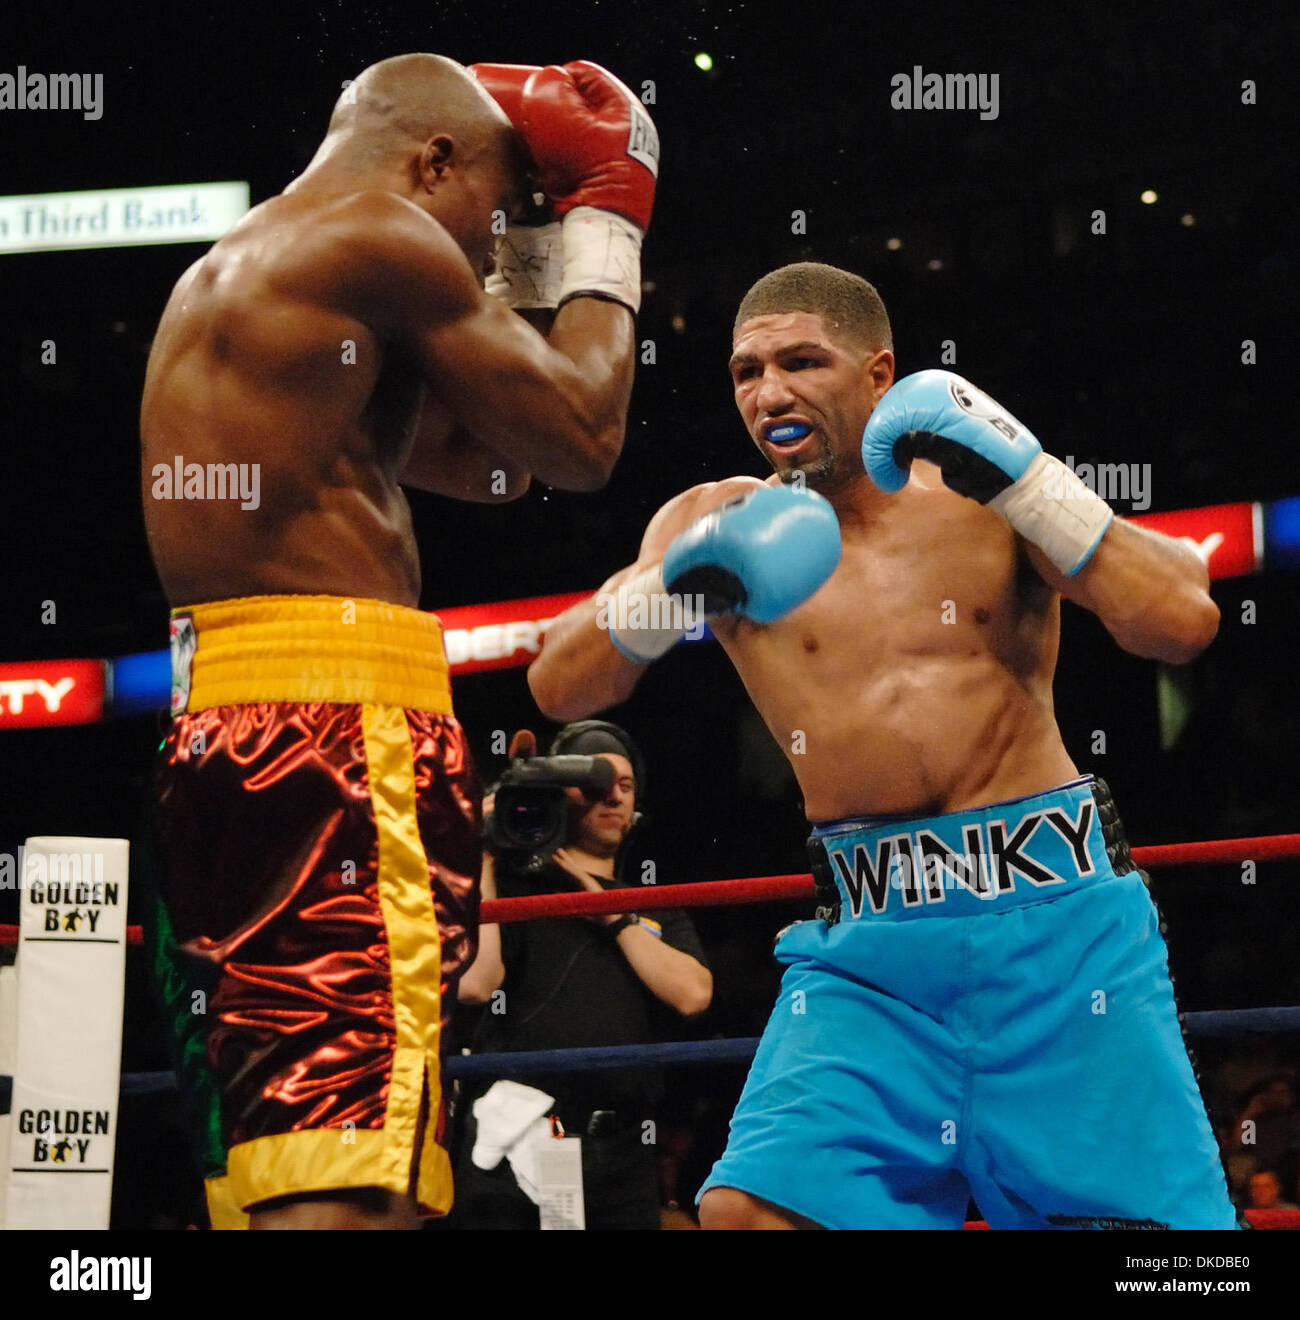 Dec 02, 2006; Tampa, FL, USA; BOXING: RONALD 'WINKY' WRIGHT defeats IKE 'BAZOOKA' QUARTEY by decision in front of a packed house at The St. Pete Times Forum in Tampa. Mandatory Credit: Photo by Rob DeLorenzo/ZUMA Press. (©) Copyright 2006 by Rob DeLorenzo Stock Photo